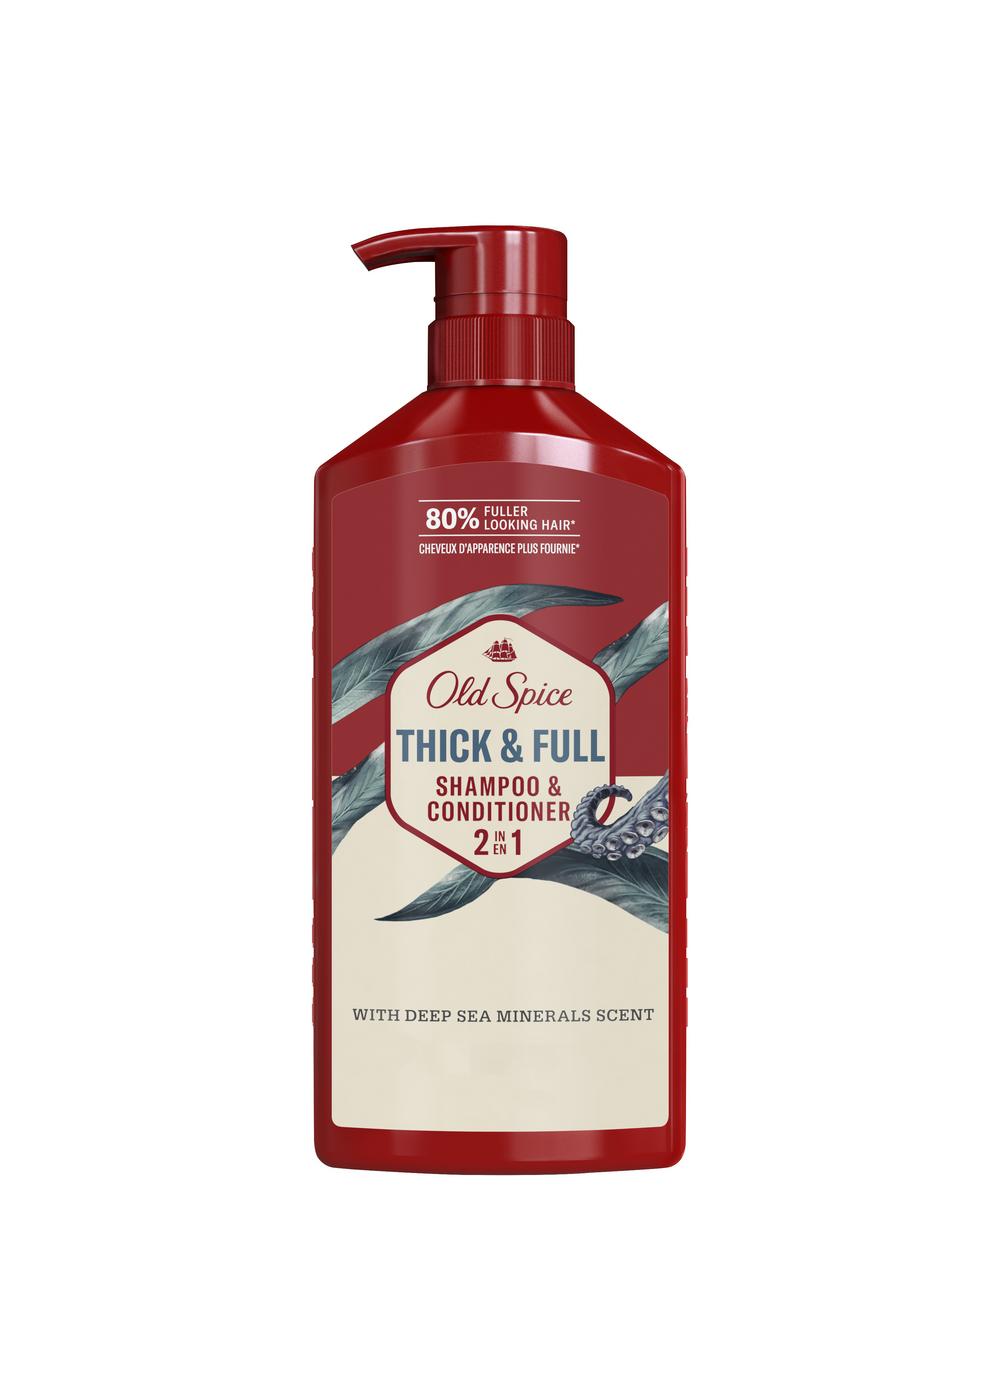 Old Spice Thick & Full 2 in 1 Shampoo & Conditioner - Deep Sea Minerals Scent; image 6 of 7